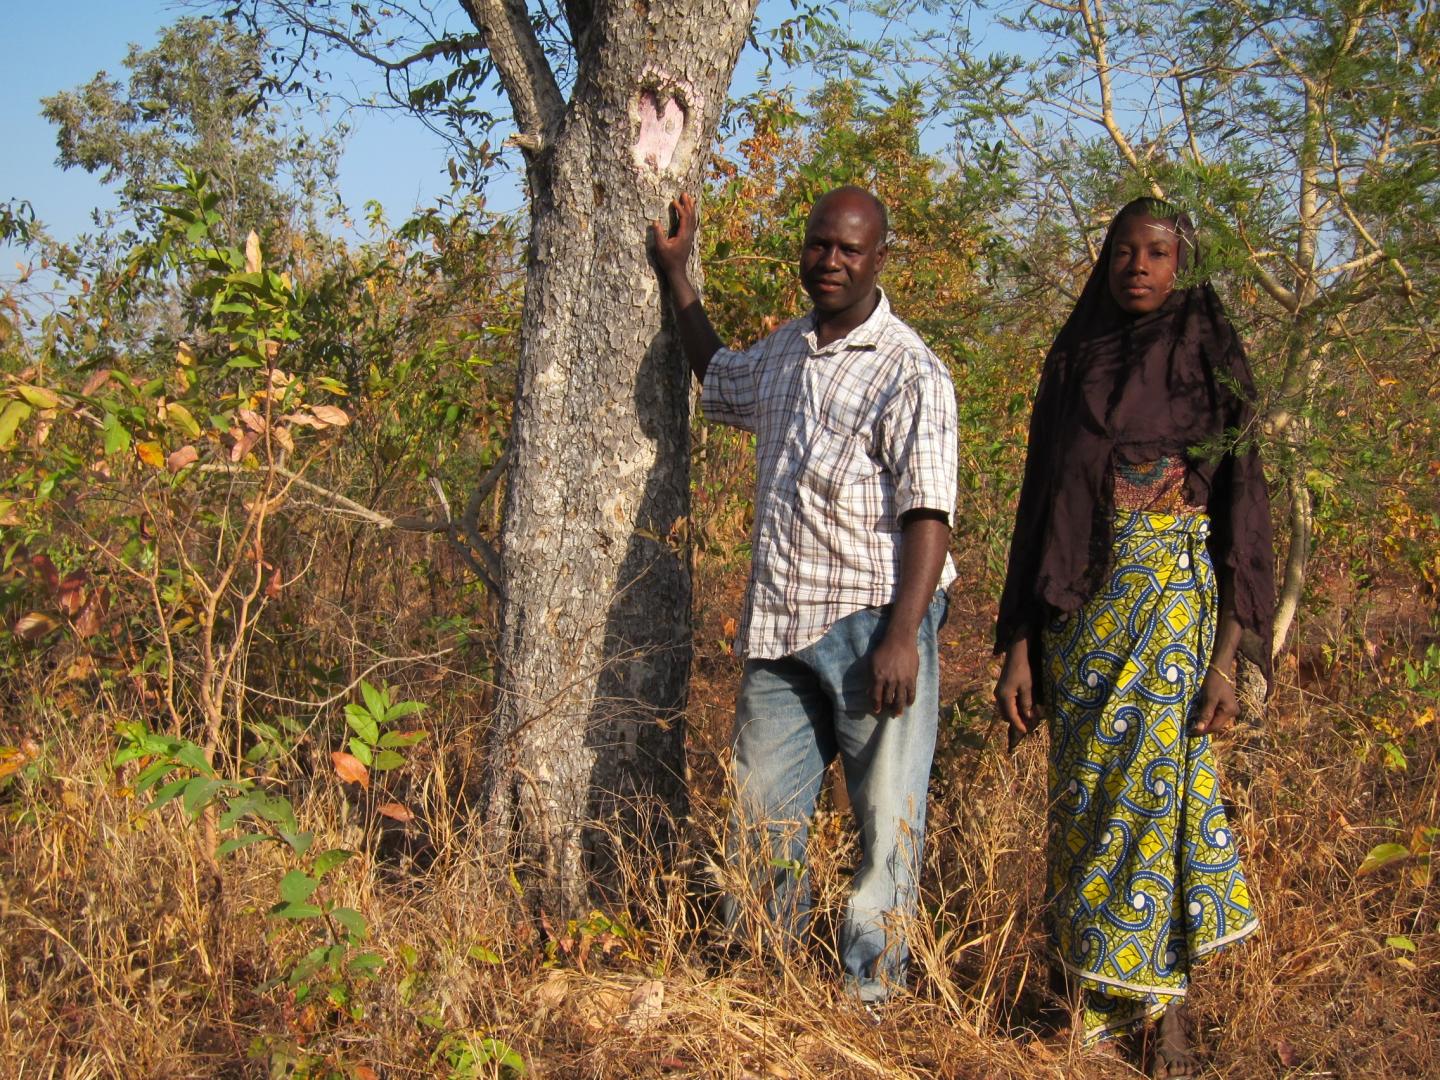 Trees on Farms in Africa Supplement Income for Rural Famers